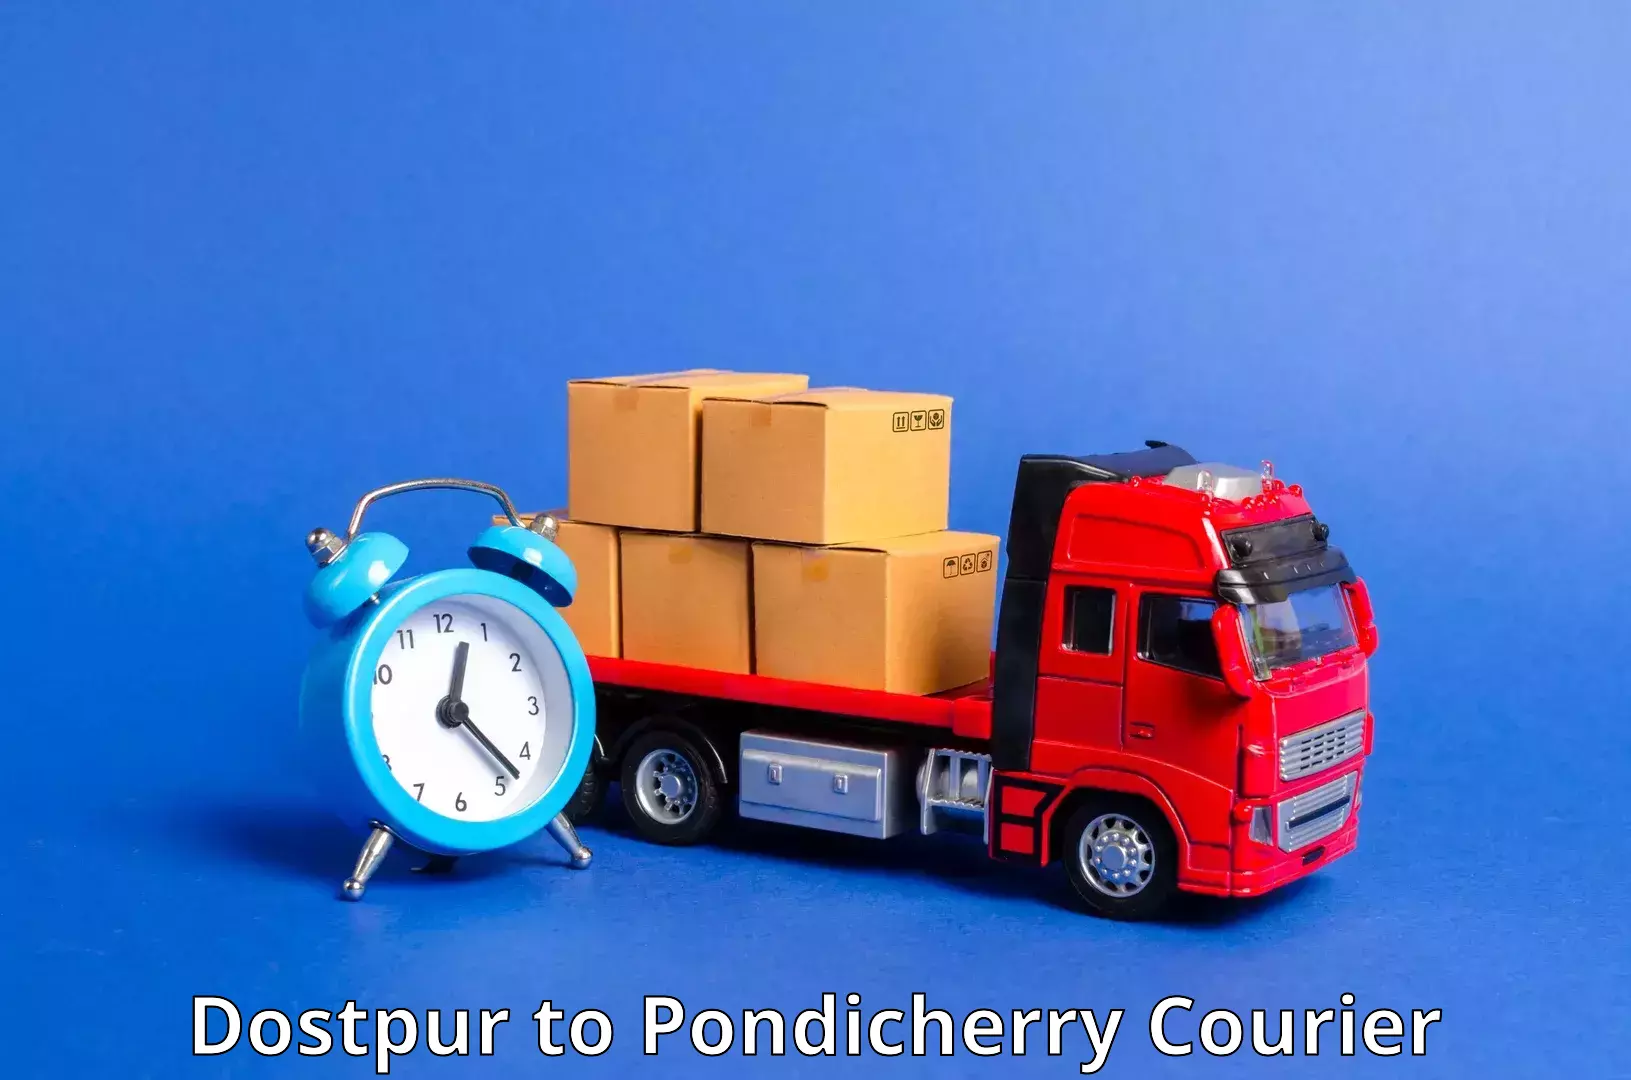 Express delivery solutions Dostpur to Pondicherry